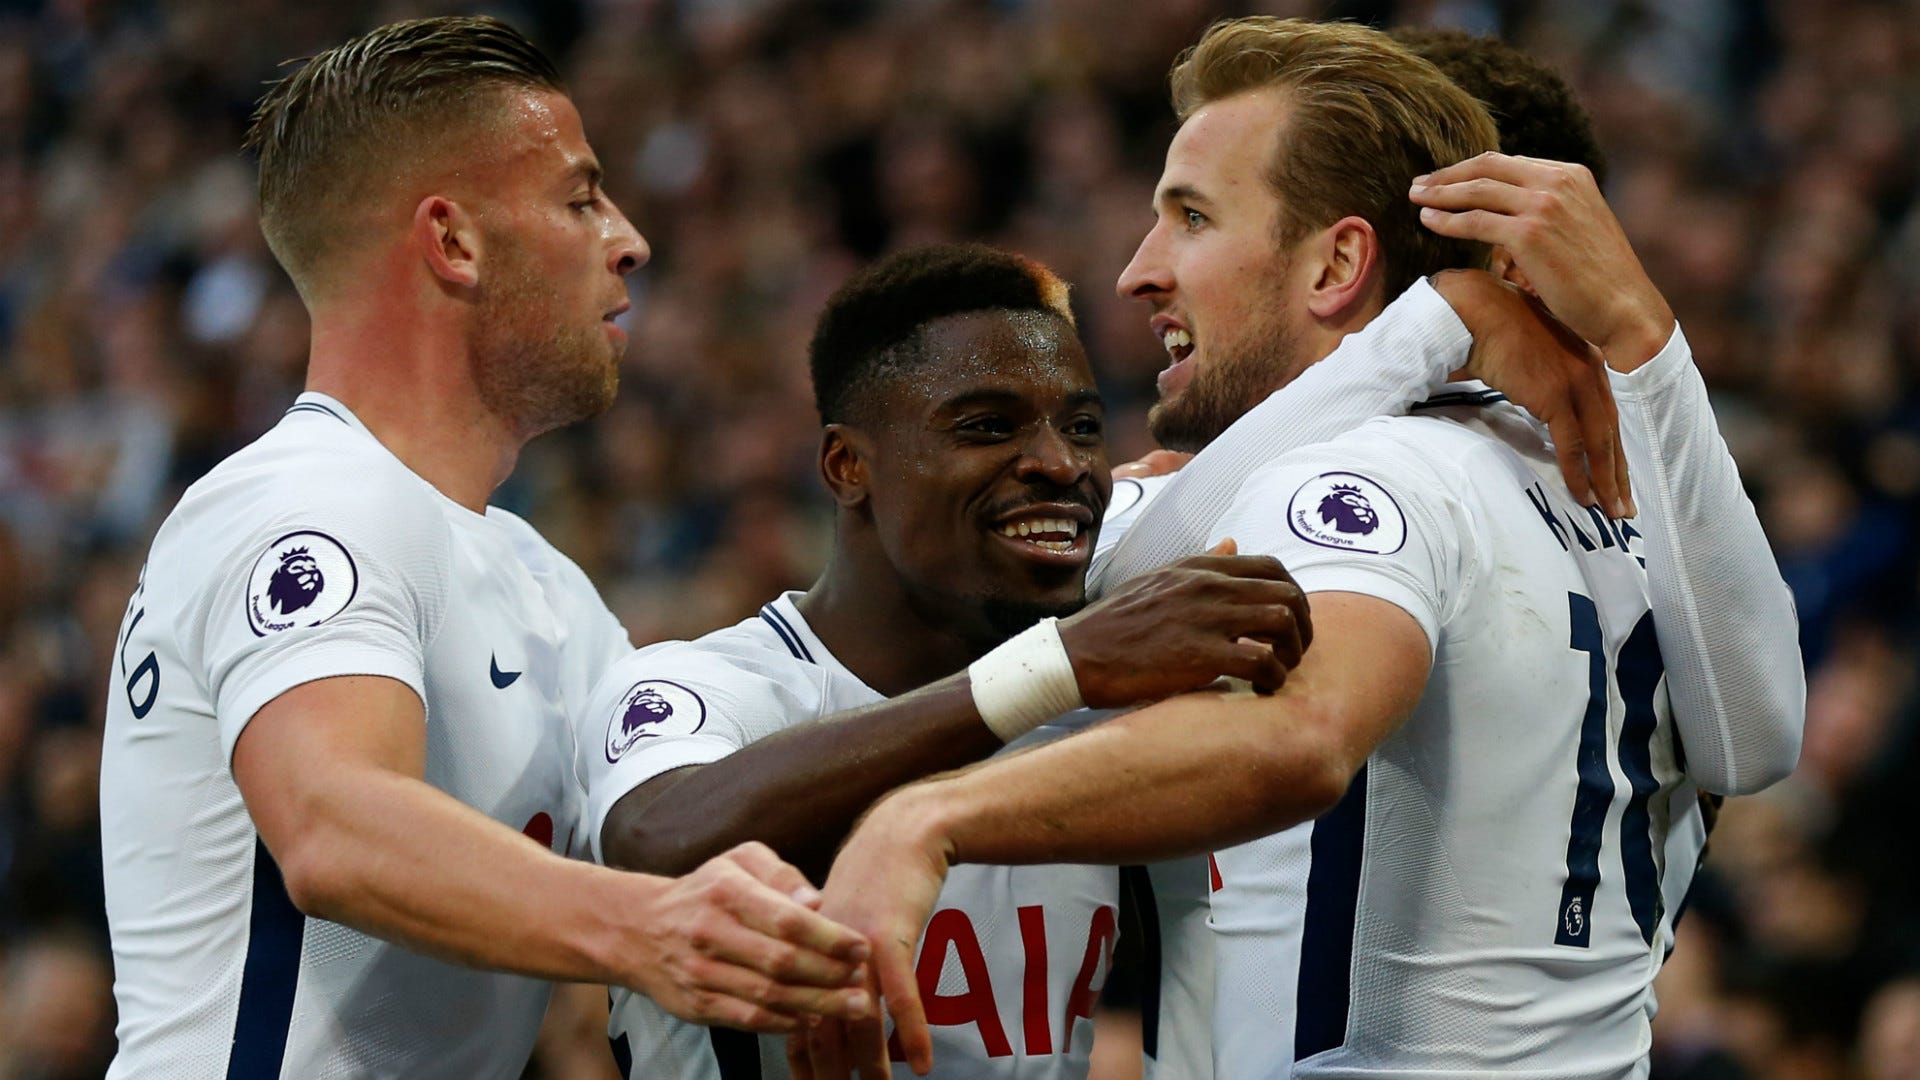 Premier League fixtures and results TV schedule, live stream and guide to Week 8 Goal Singapore